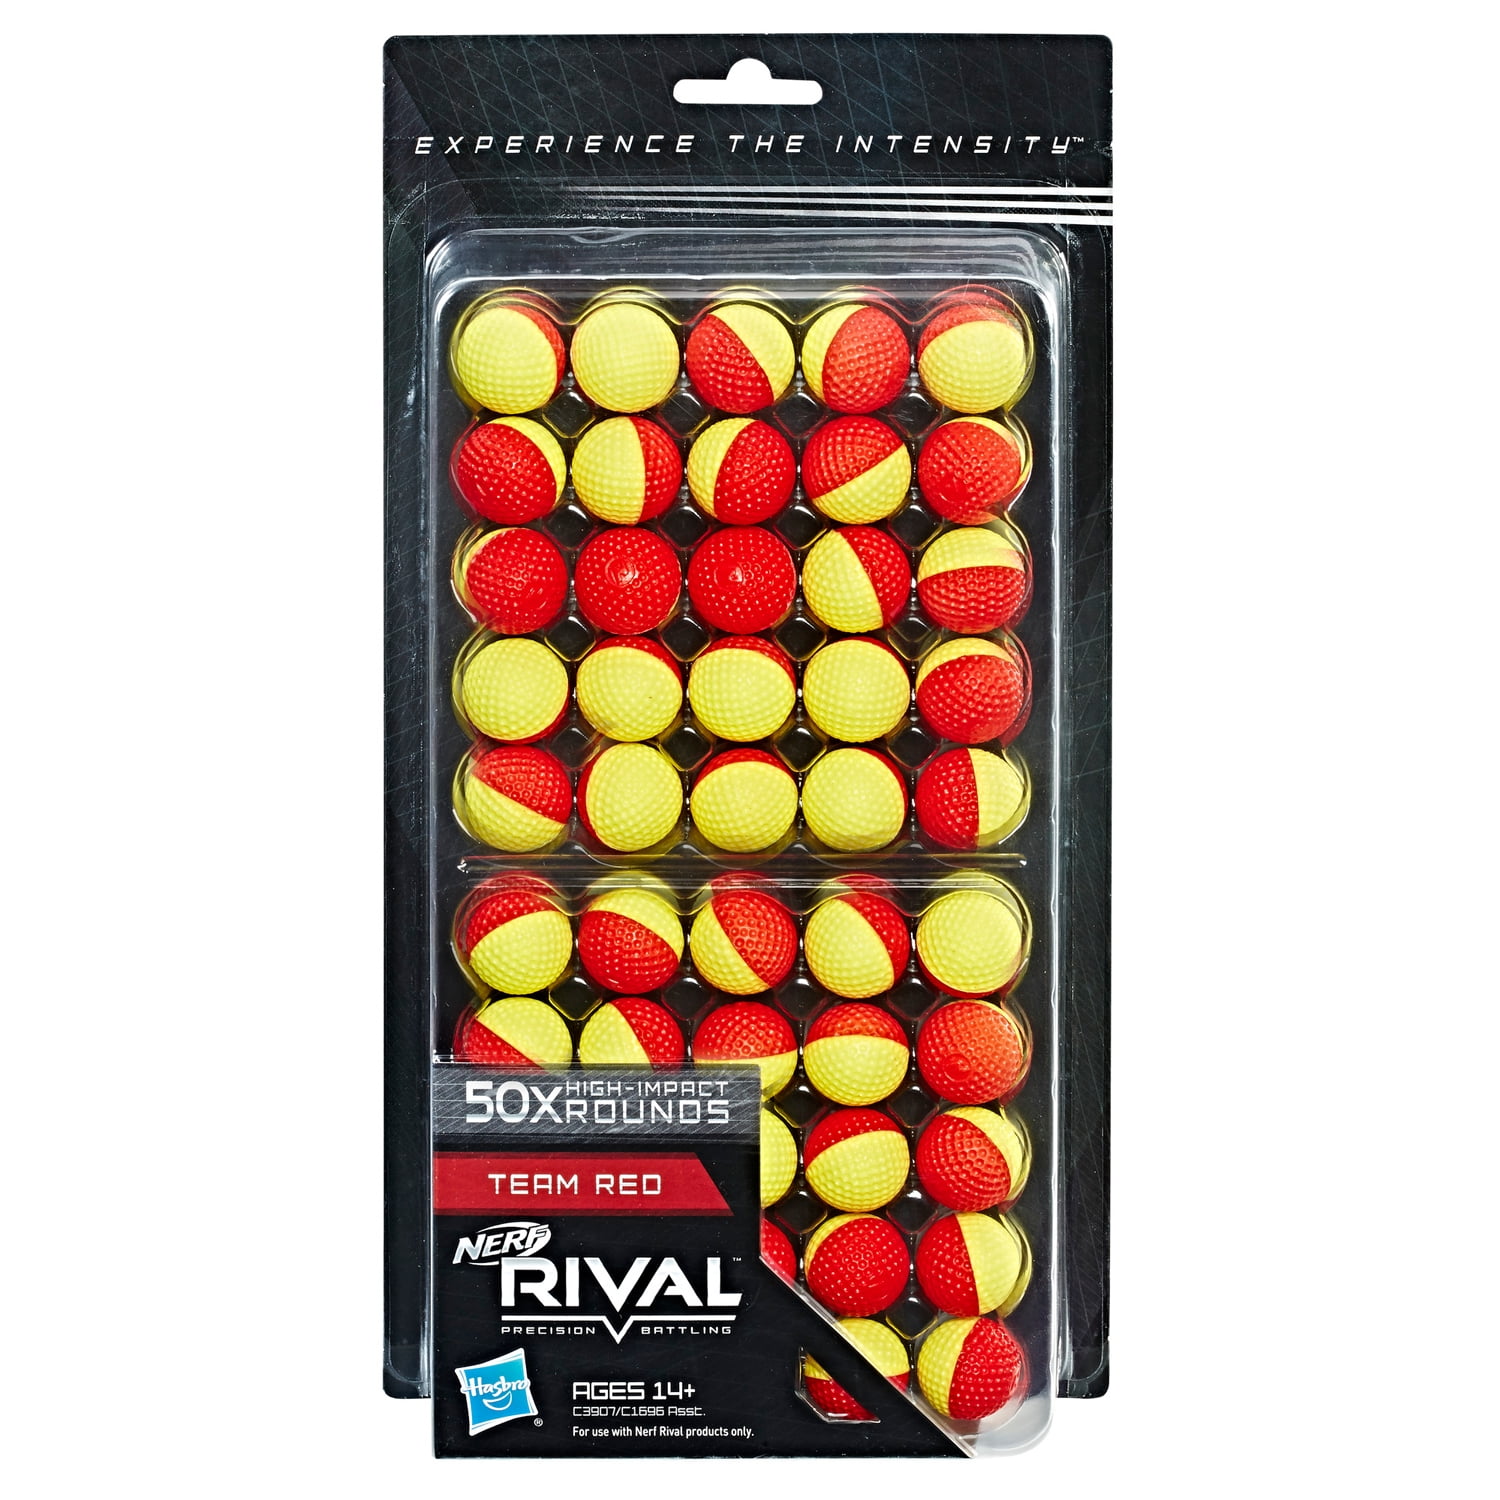 Tw291 NERF Rival Overwatch Balls 30x High Impact Rounds Refill for sale online